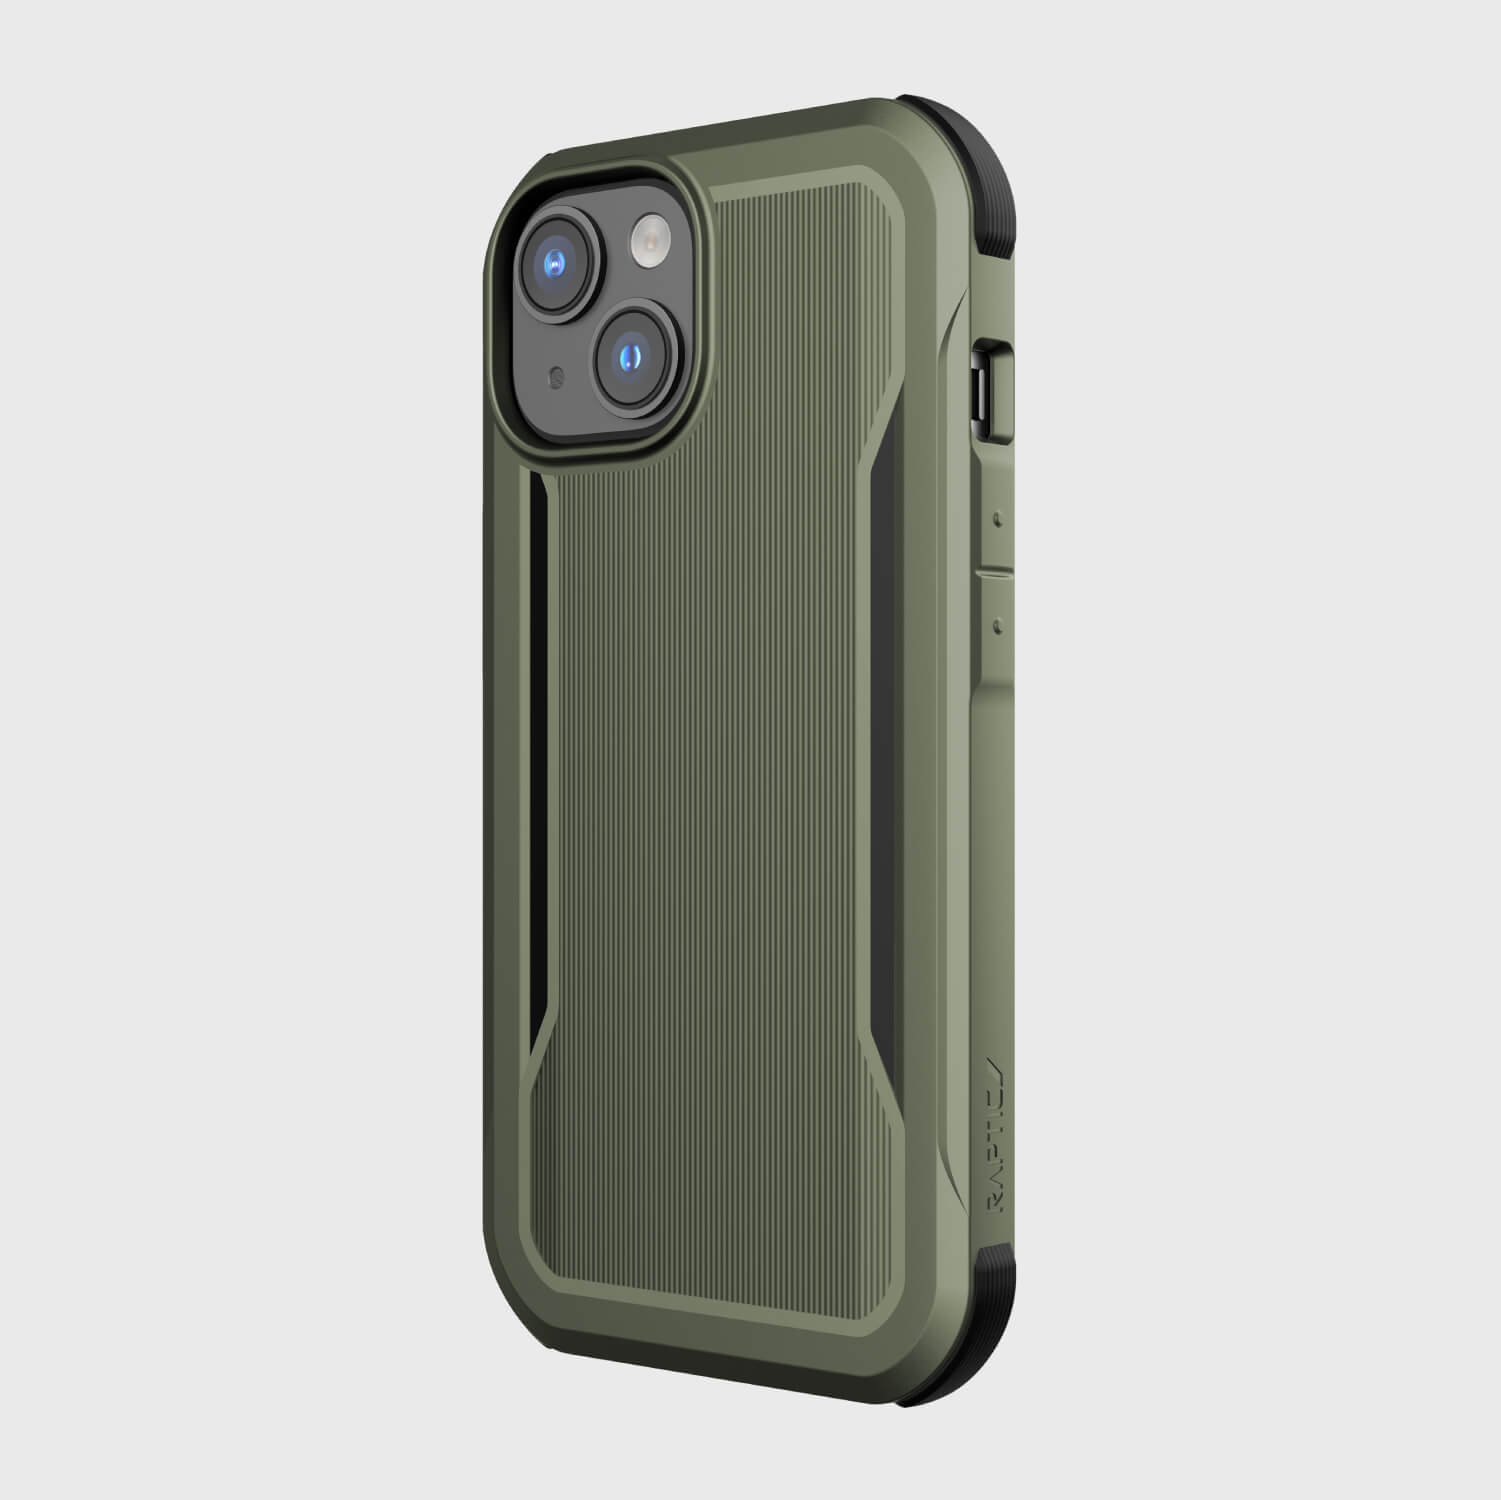 The iPhone 14 Case - Fort Built for MagSafe in olive green, offering military-grade drop protection and MagSafe compatibility by Raptic.